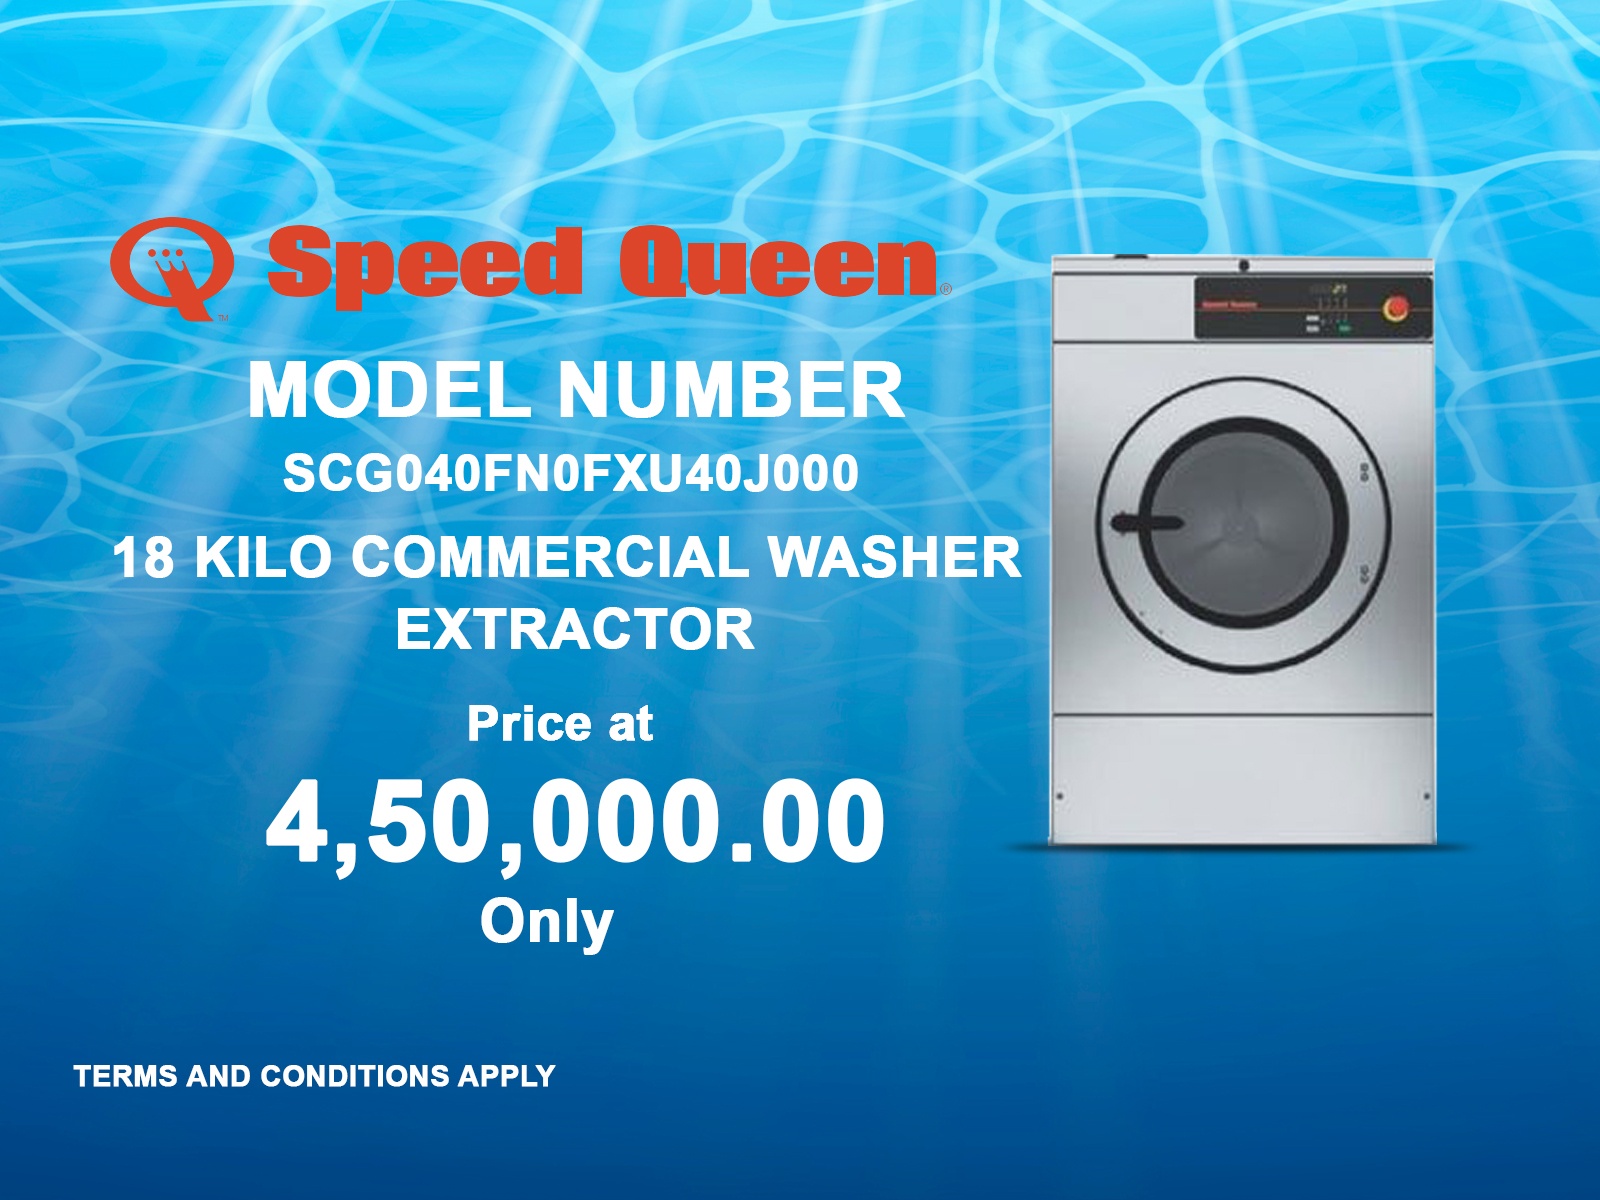 18 Kilo Commercial Washer Extractor